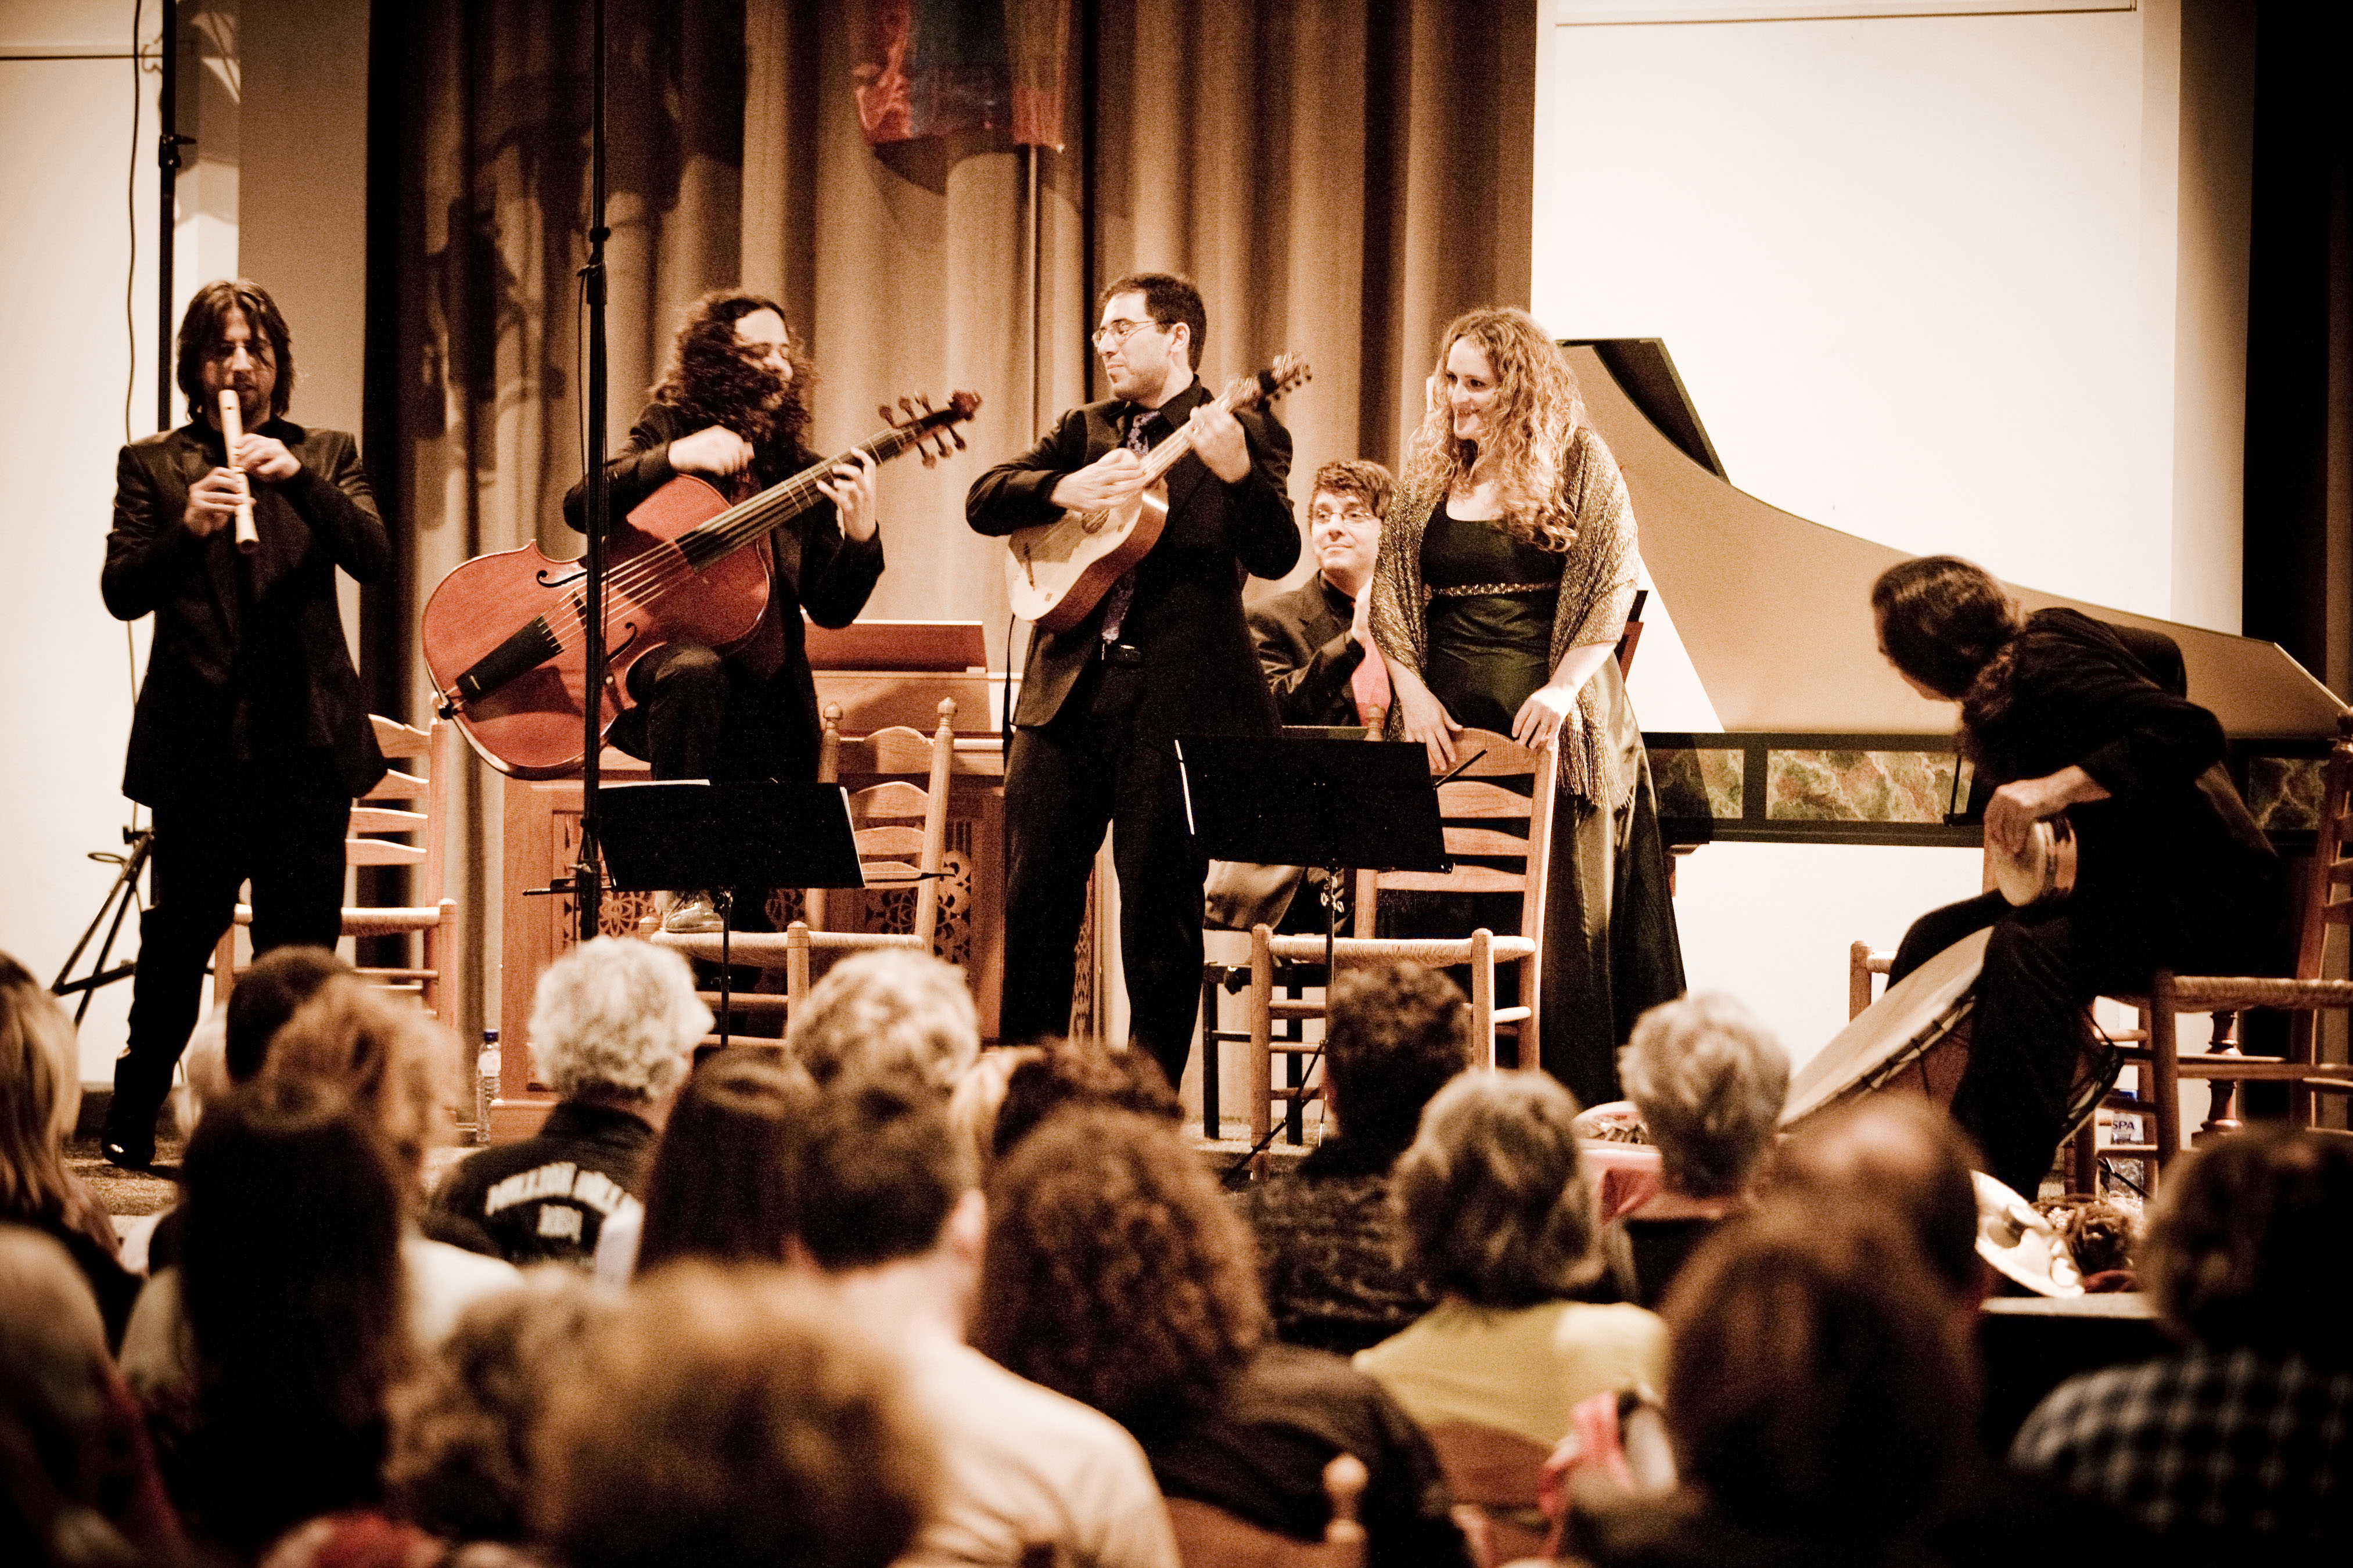 More Hispano at Utrecht Early music festival. Photo by Marco Borggreve